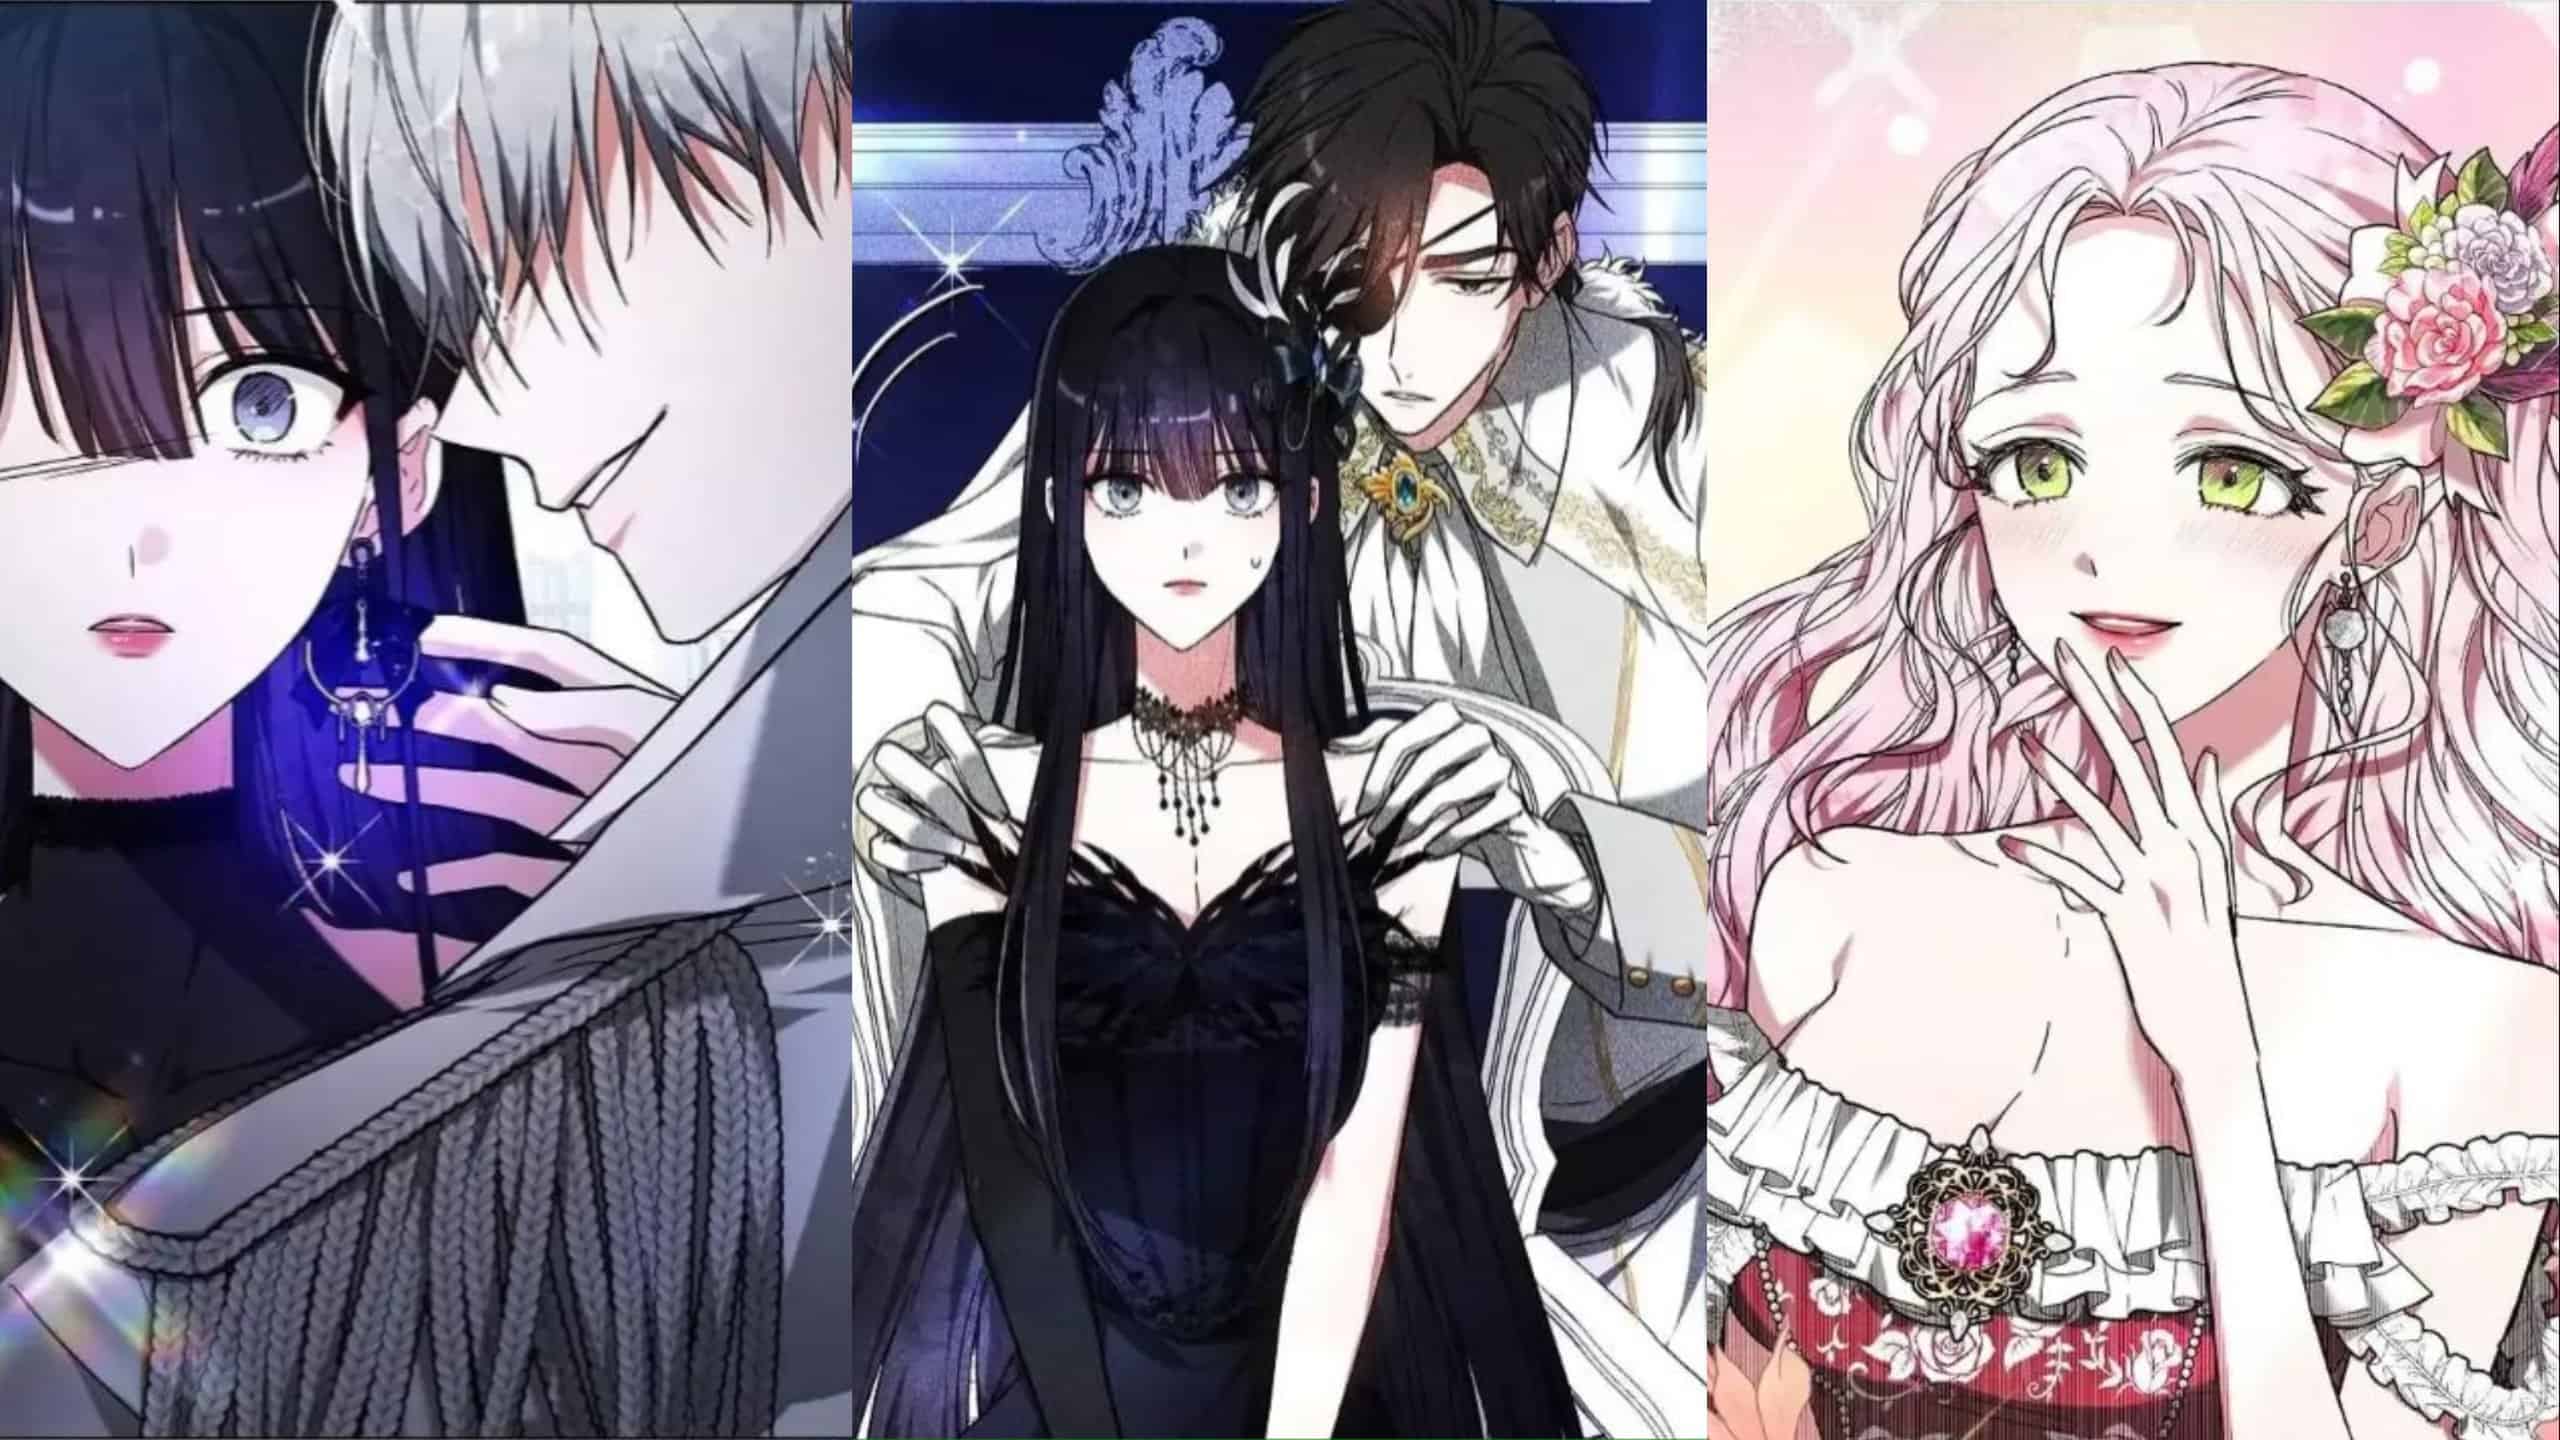 The Obsidian Bride Stills from Chapter 3